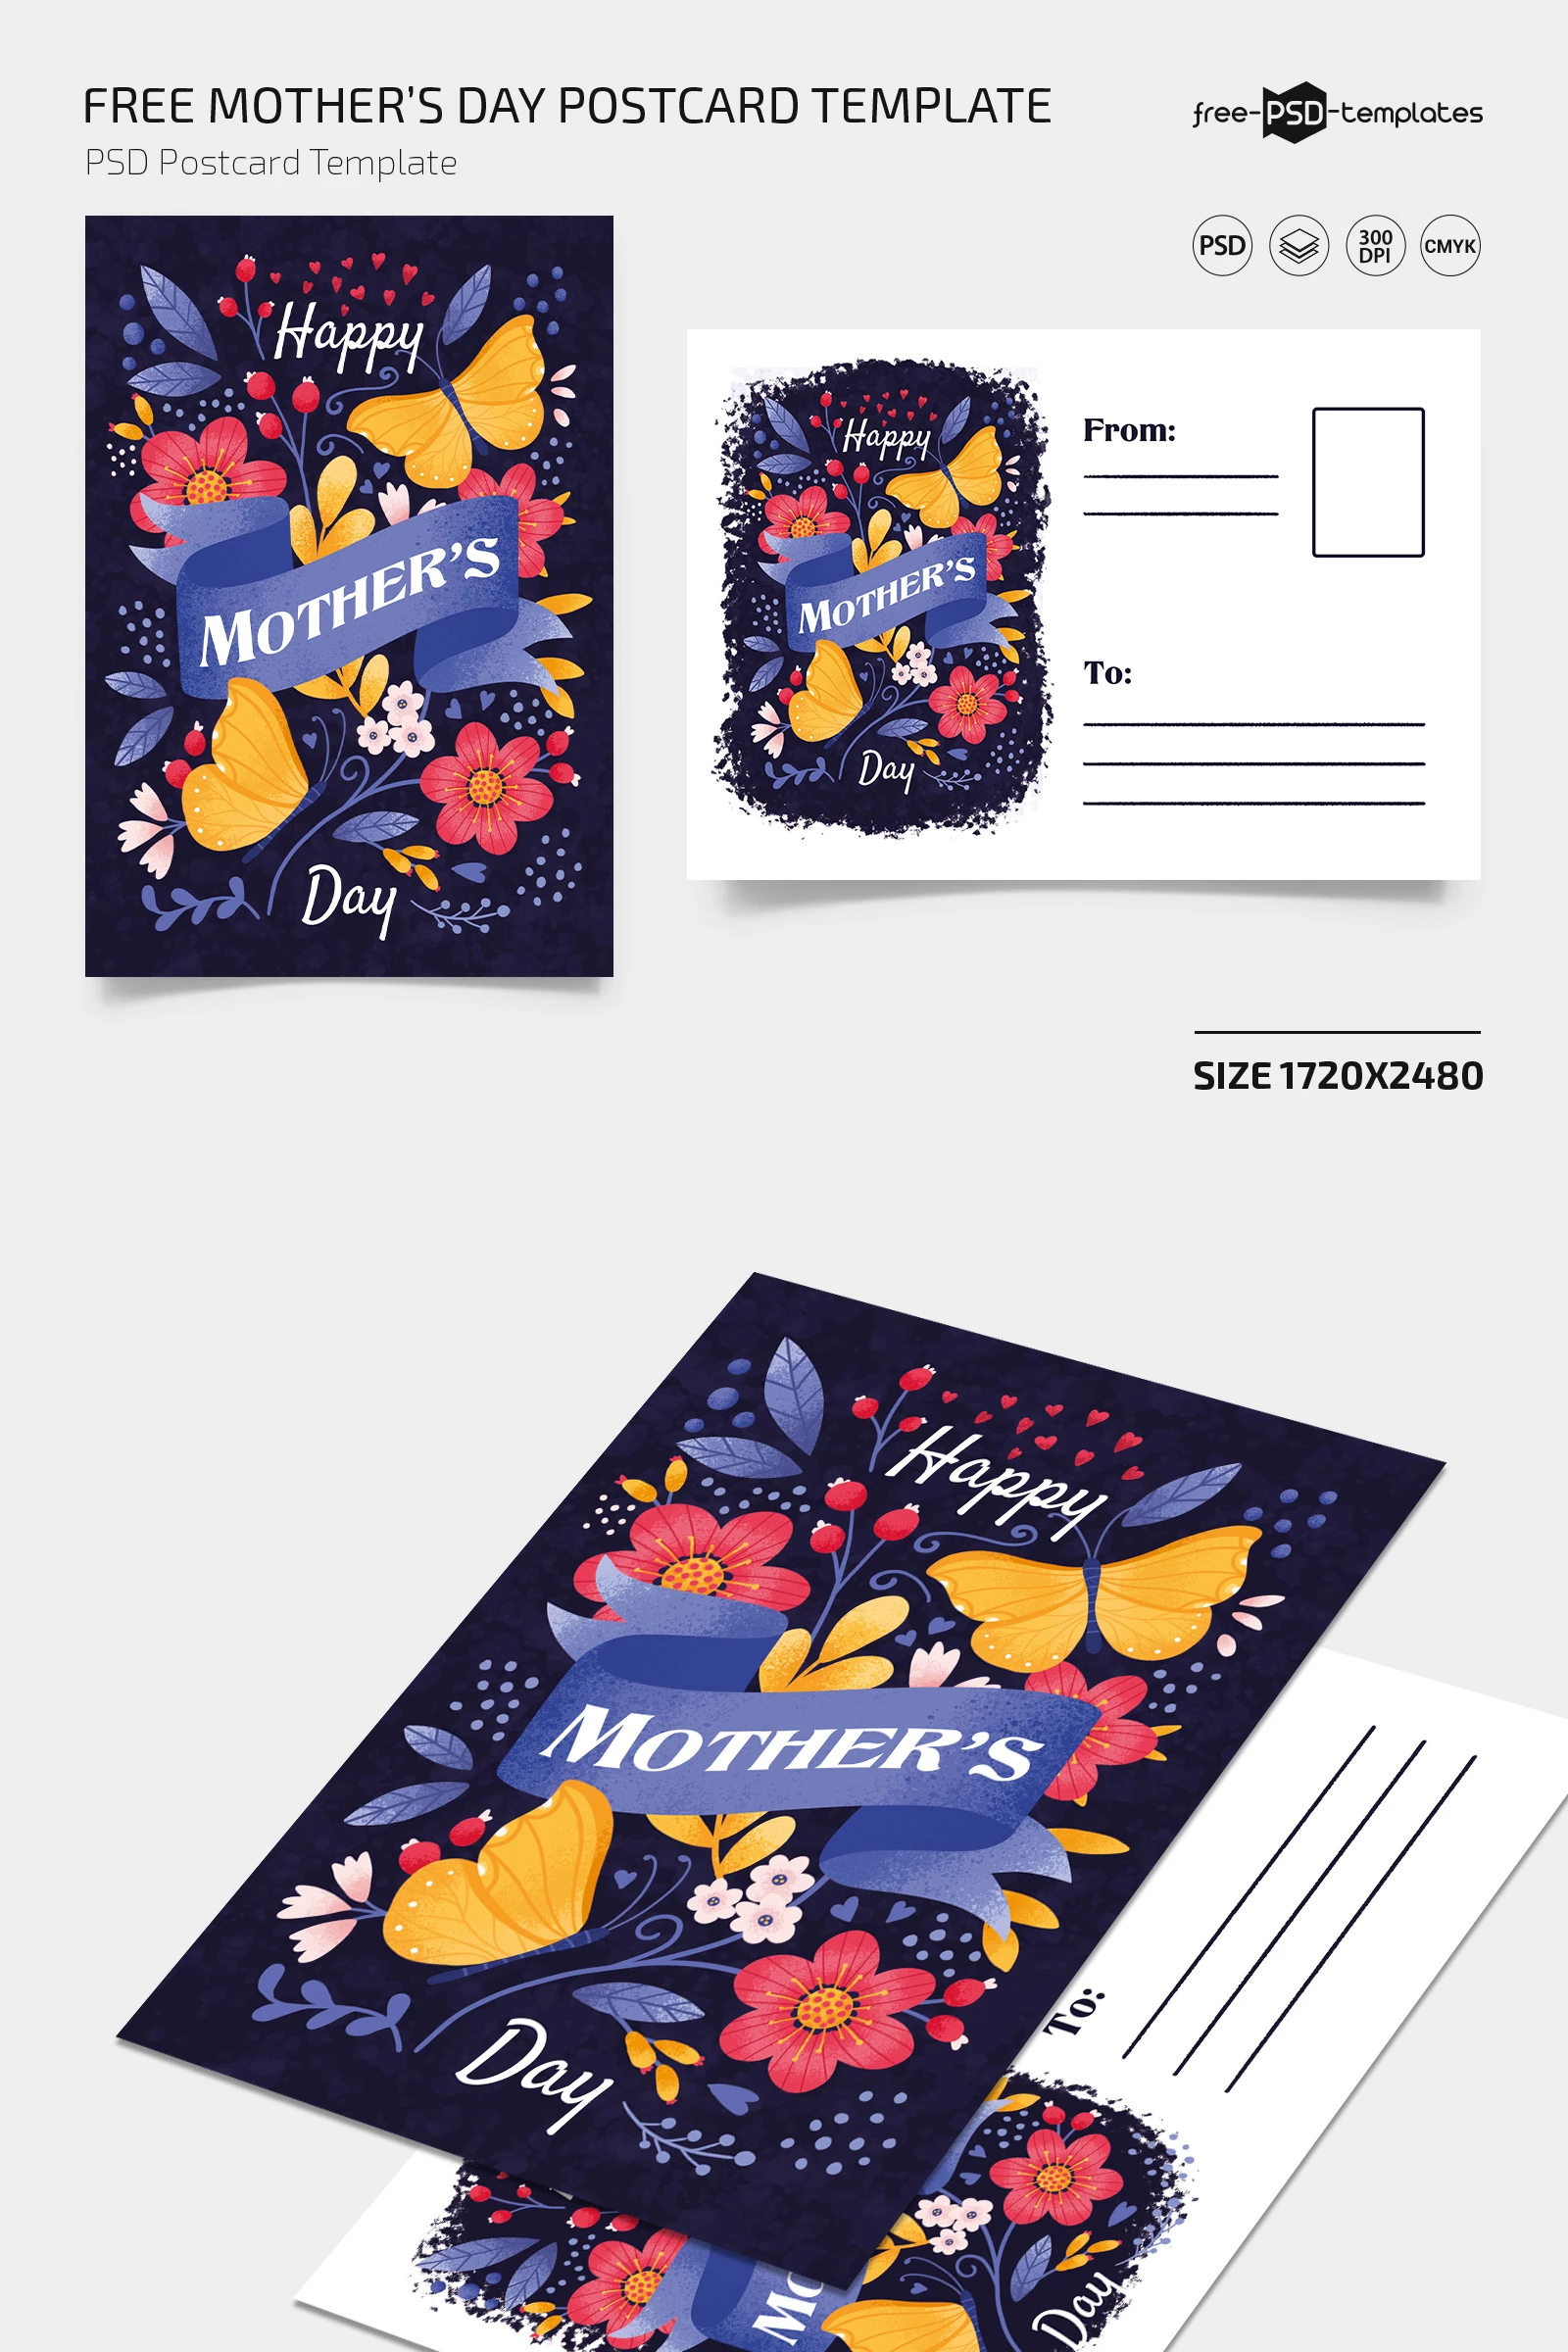 Free Mother’s Day Postcard Template in PSD